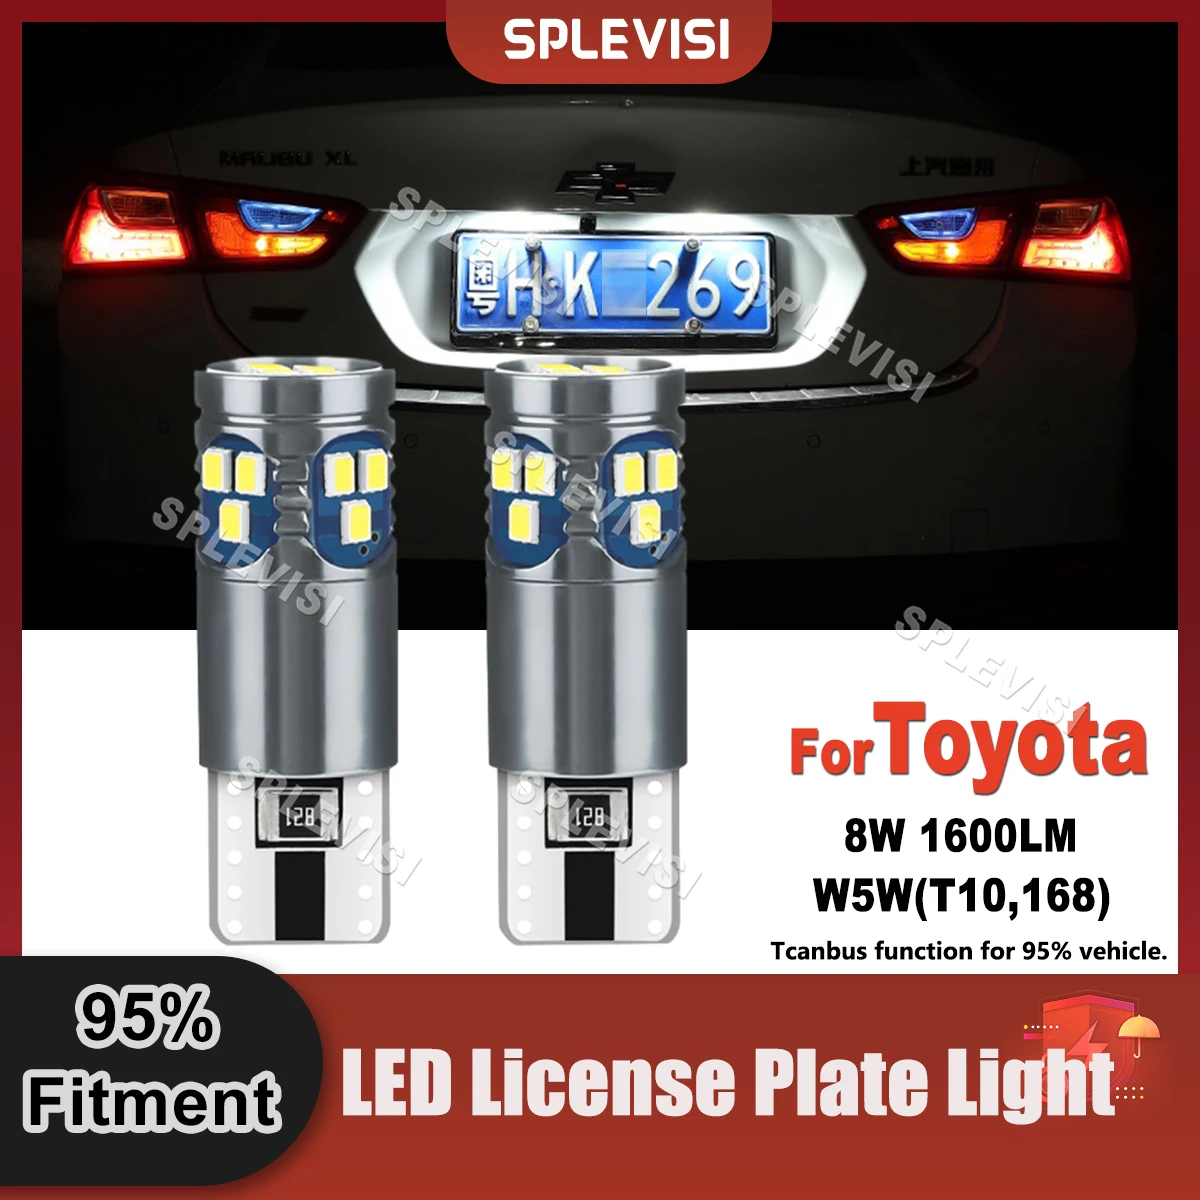 

Plug And Play T10 W5W LED License Number Plate Light Bulbs Canbus For Toyota 4Runner Tacoma CHR Highlander Avensis Auris Verso